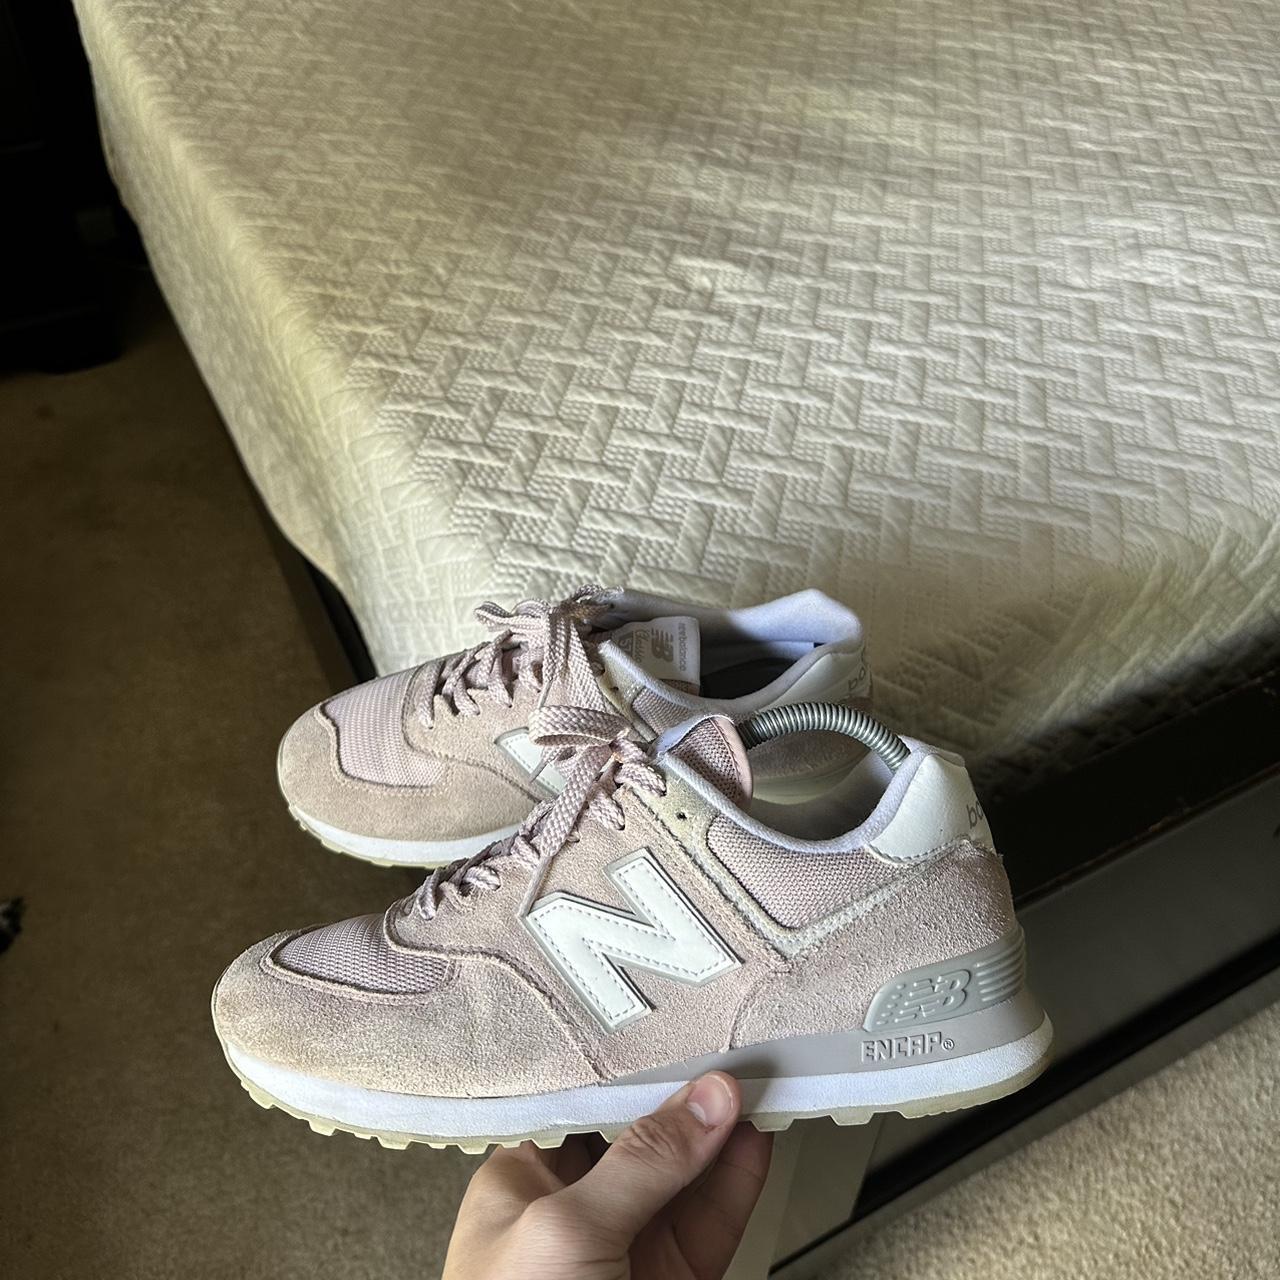 New Balance Women's Pink and White Trainers (6)